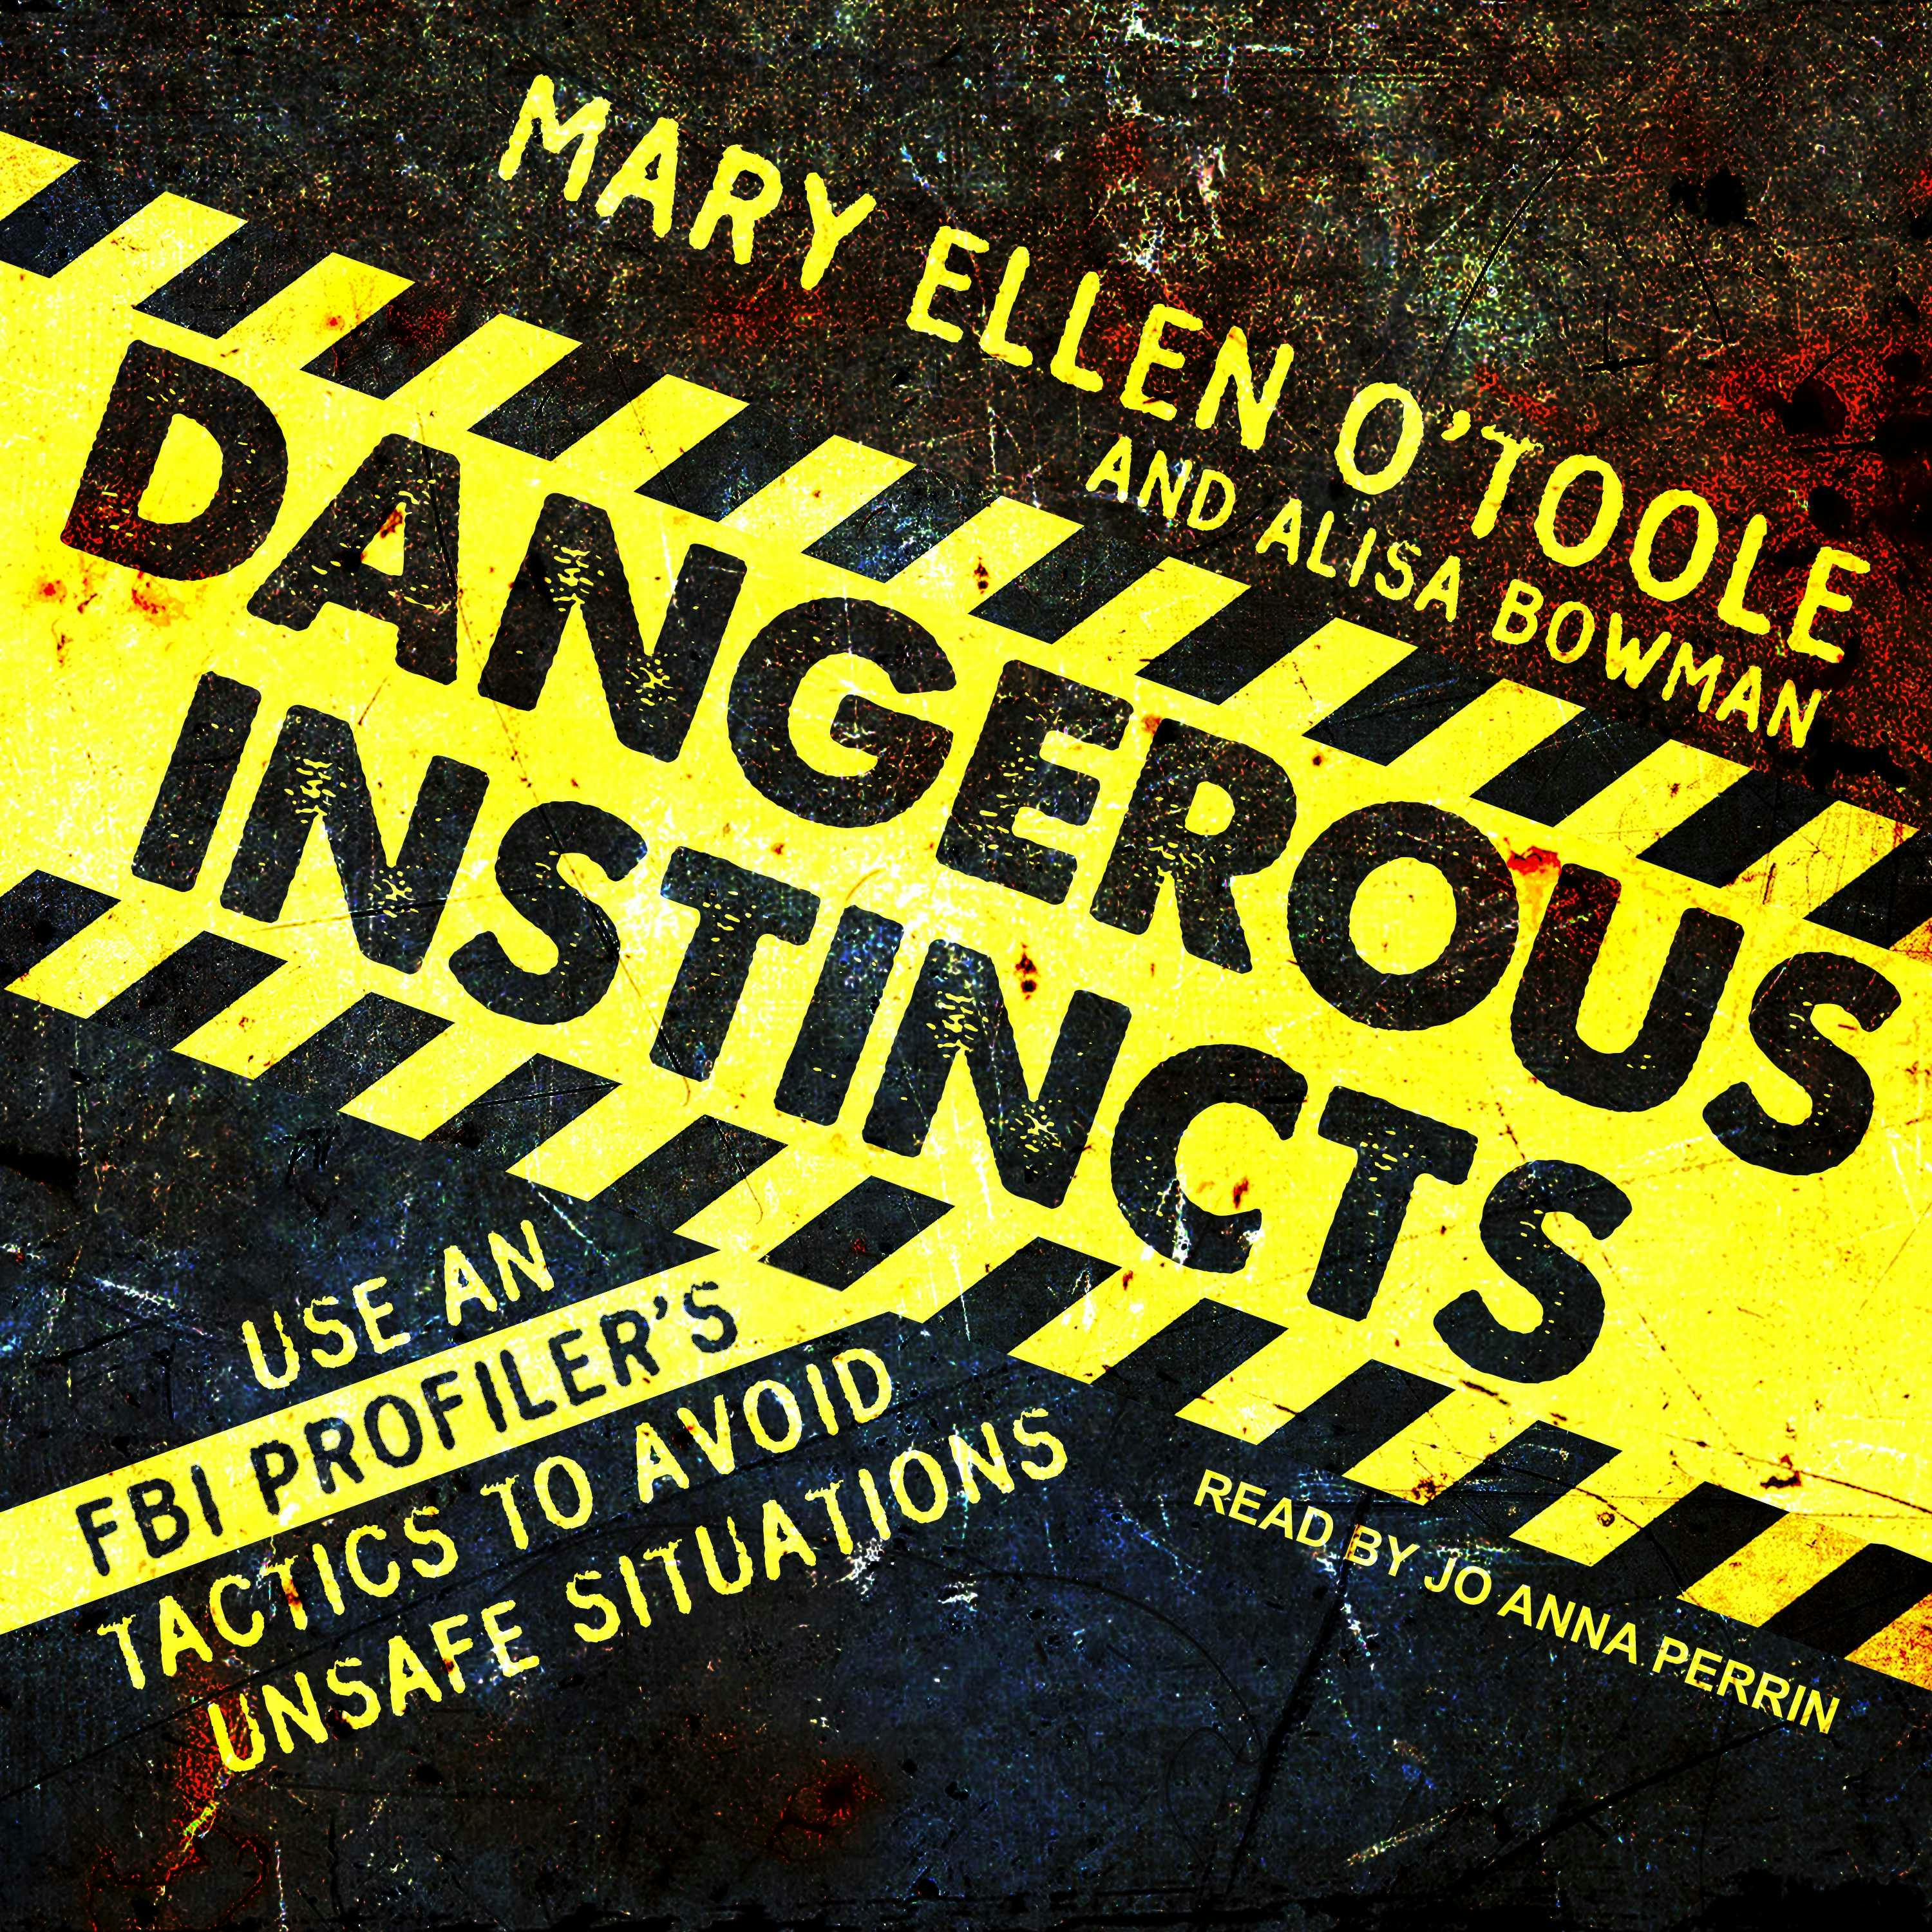 Dangerous Instincts: Use an FBI Profiler's Tactics to Avoid Unsafe Situations - Alisa Bowman, Mary Ellen O'Toole